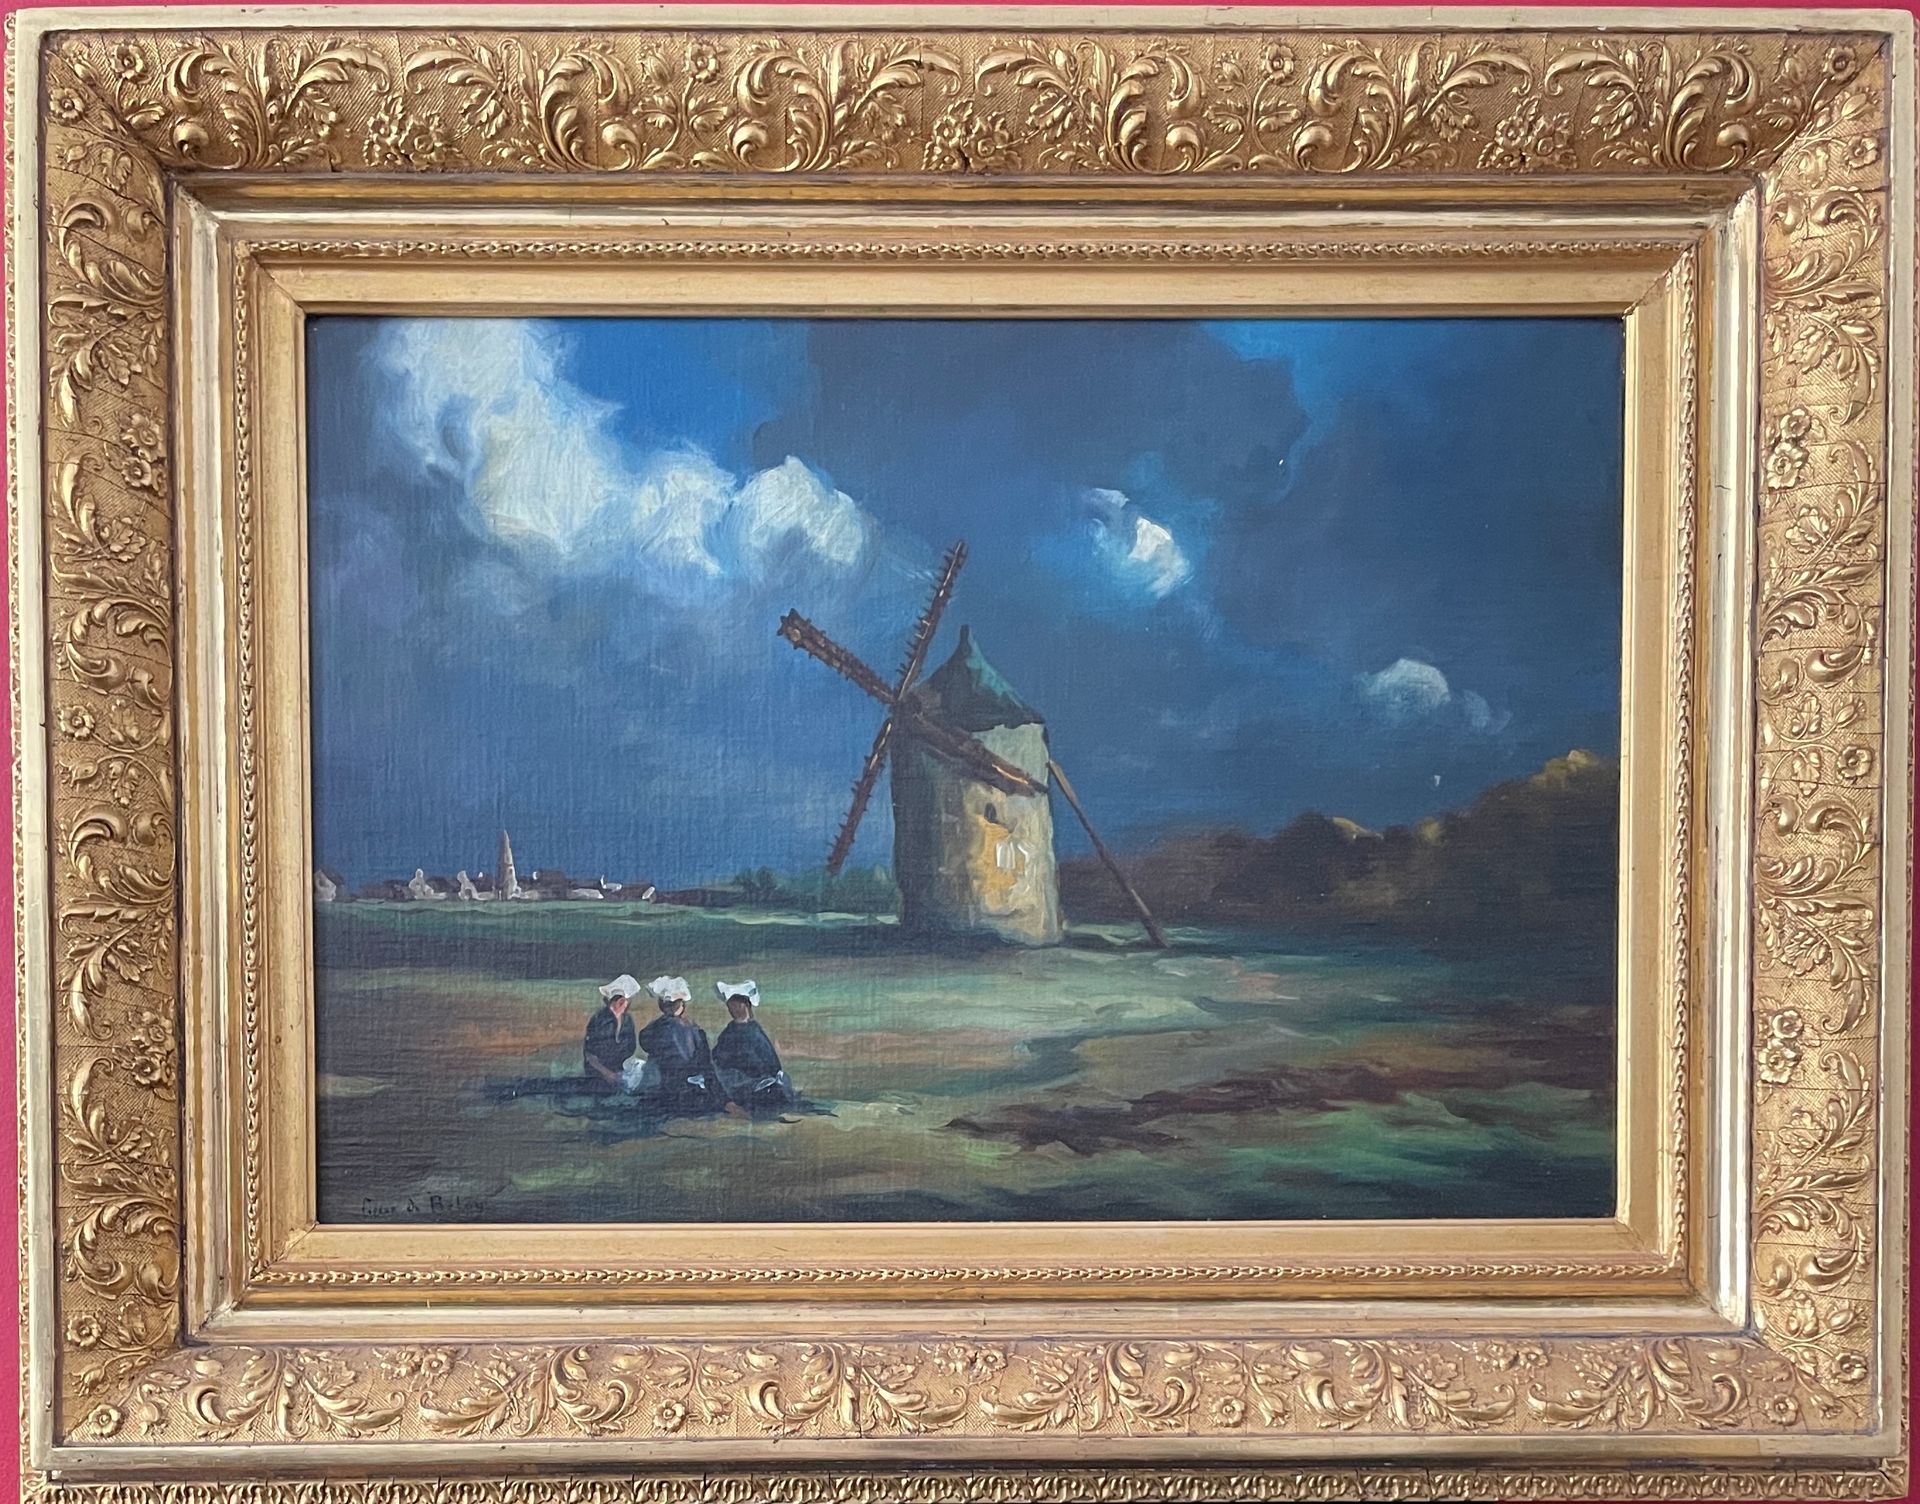 Null PIERRE DE BELAY (1890-1947)

LANDSCAPE WITH A MILL

Oil on canvas 

Height:&hellip;